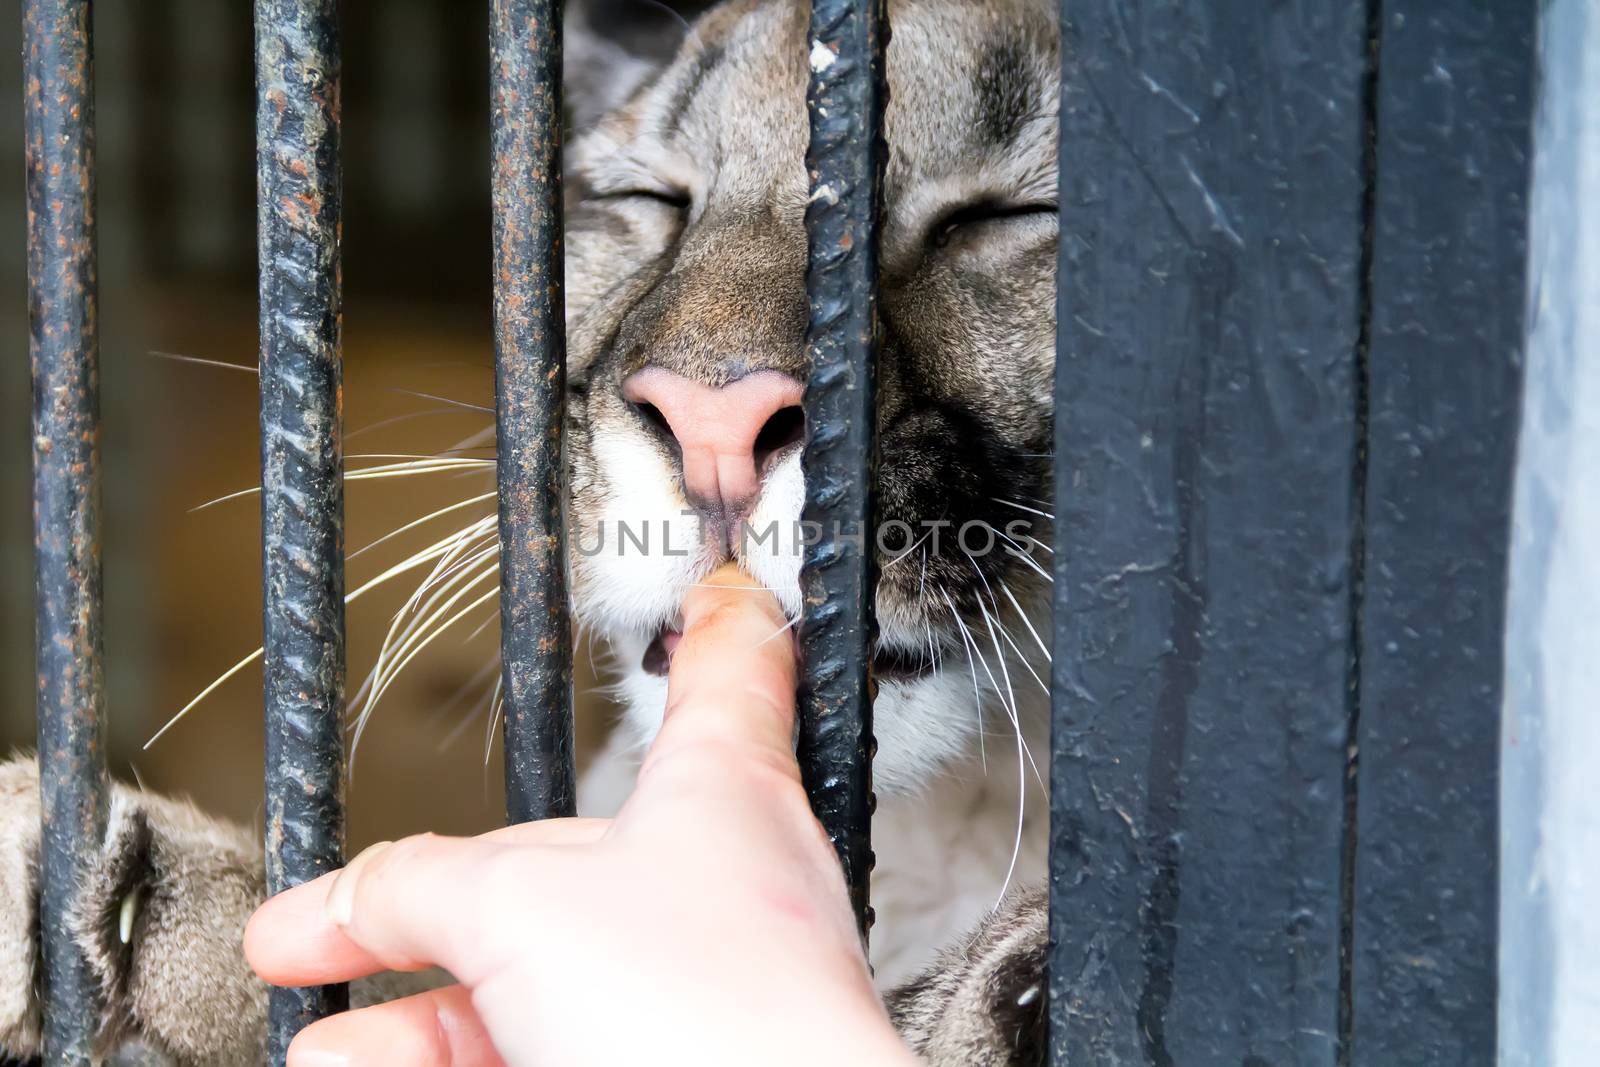 Lioness in the zoo biting human finger